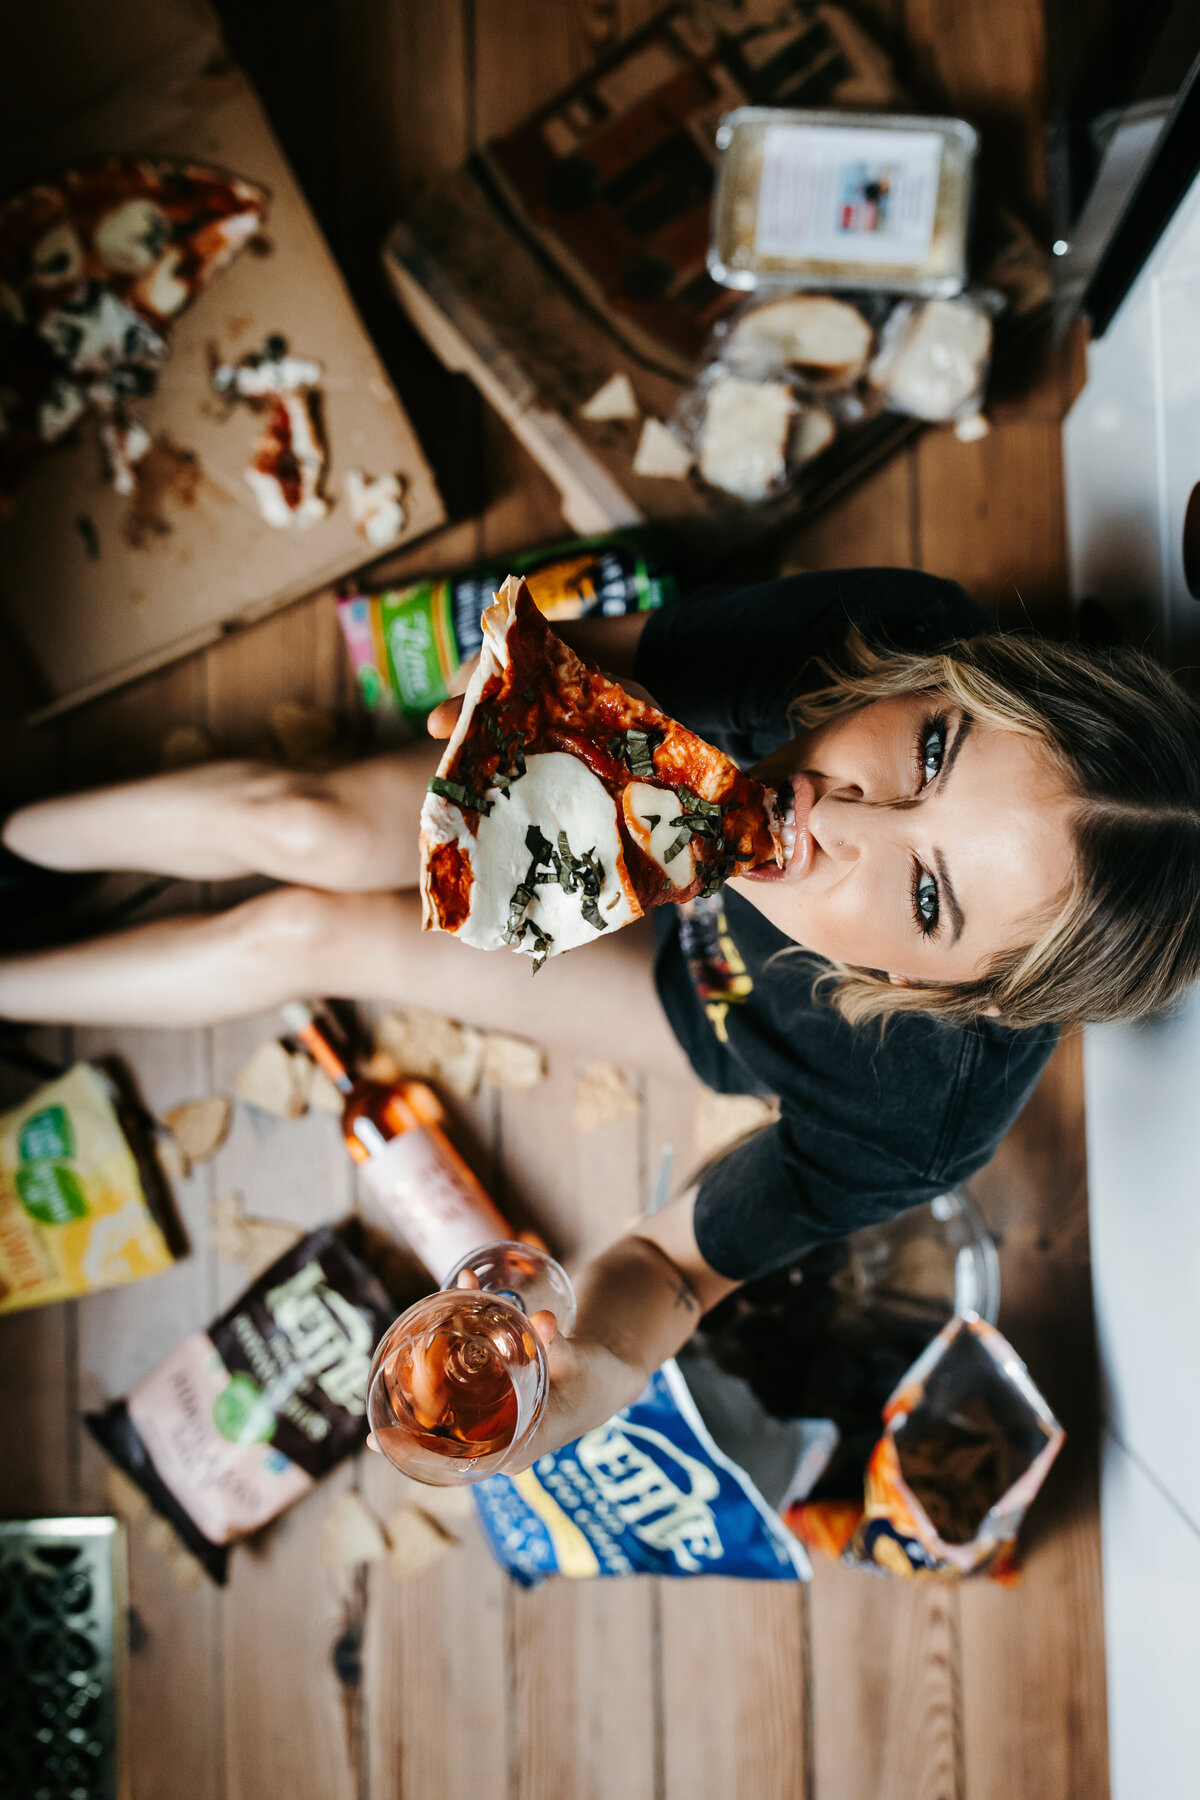 Kaitlyn Bristowe Spade & Sparrow photoshoot sitting on the floor eating pizza and chips